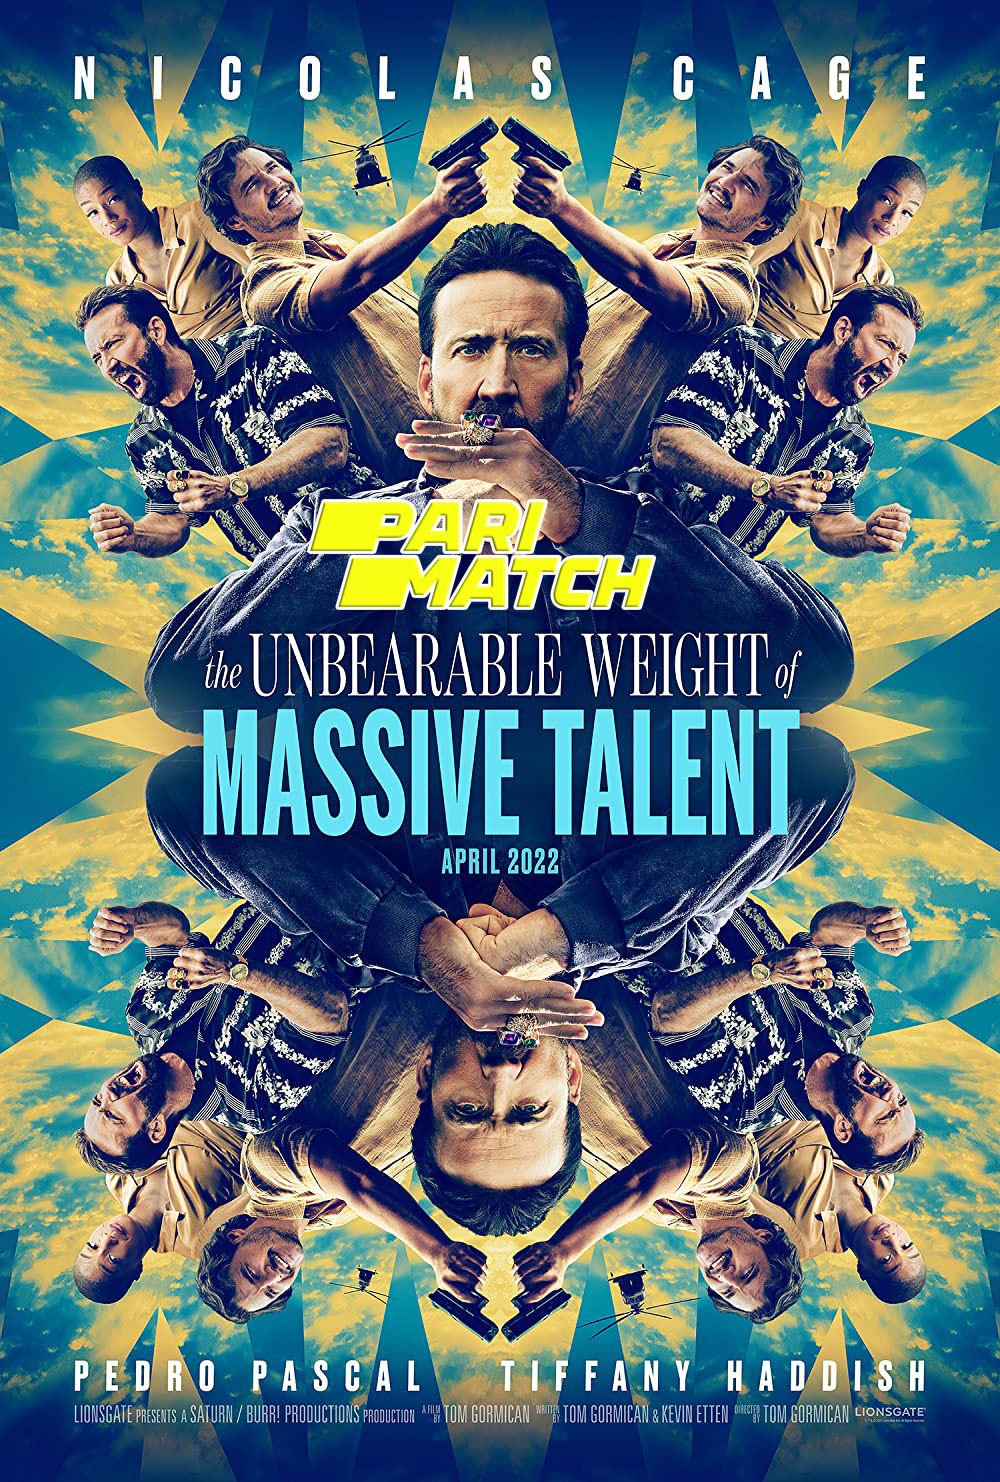 The Unbearable Weight of Massive Talent (2022) Bengali Dubbed (VO) [PariMatch] 720p WEBRip 900MB Download